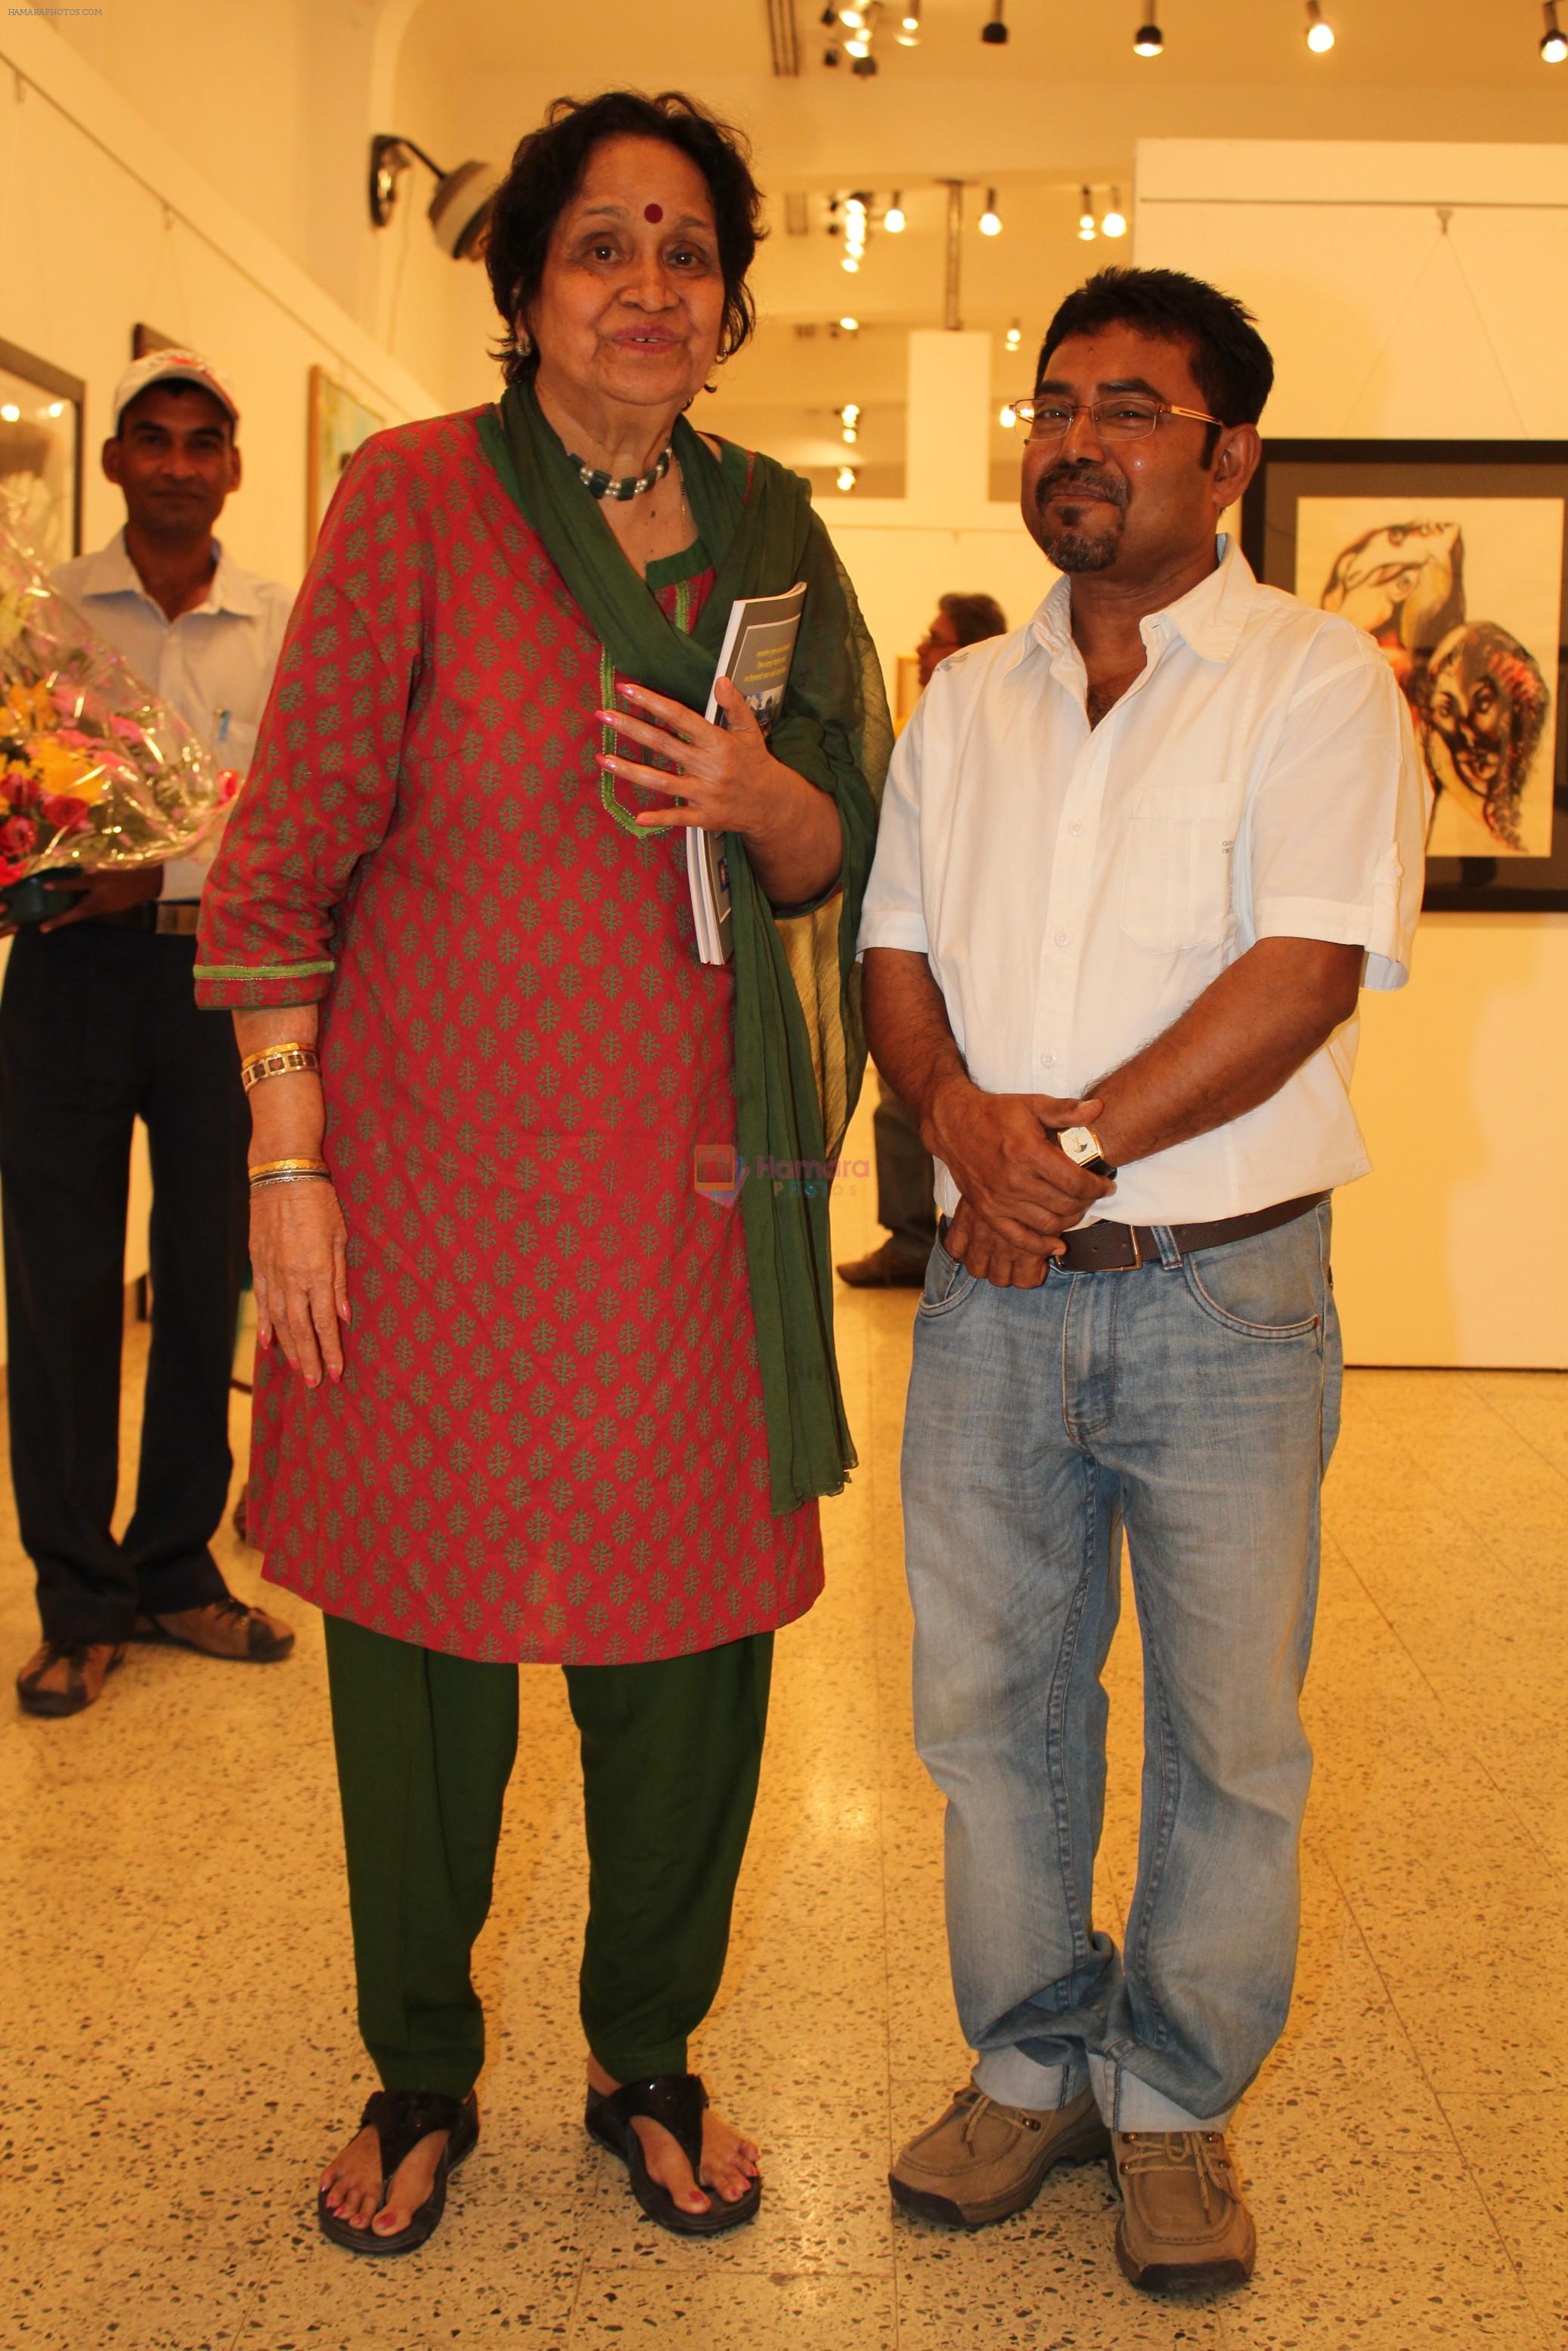 Anjolie_Ela_Menon&BasudebBiswas at Rejuvenation 2012 � An exhibition of Sculptures by Basudeb Biswas & Paintings by Subroto Mandal in Jahangir Art Gallery on 9th May 2012